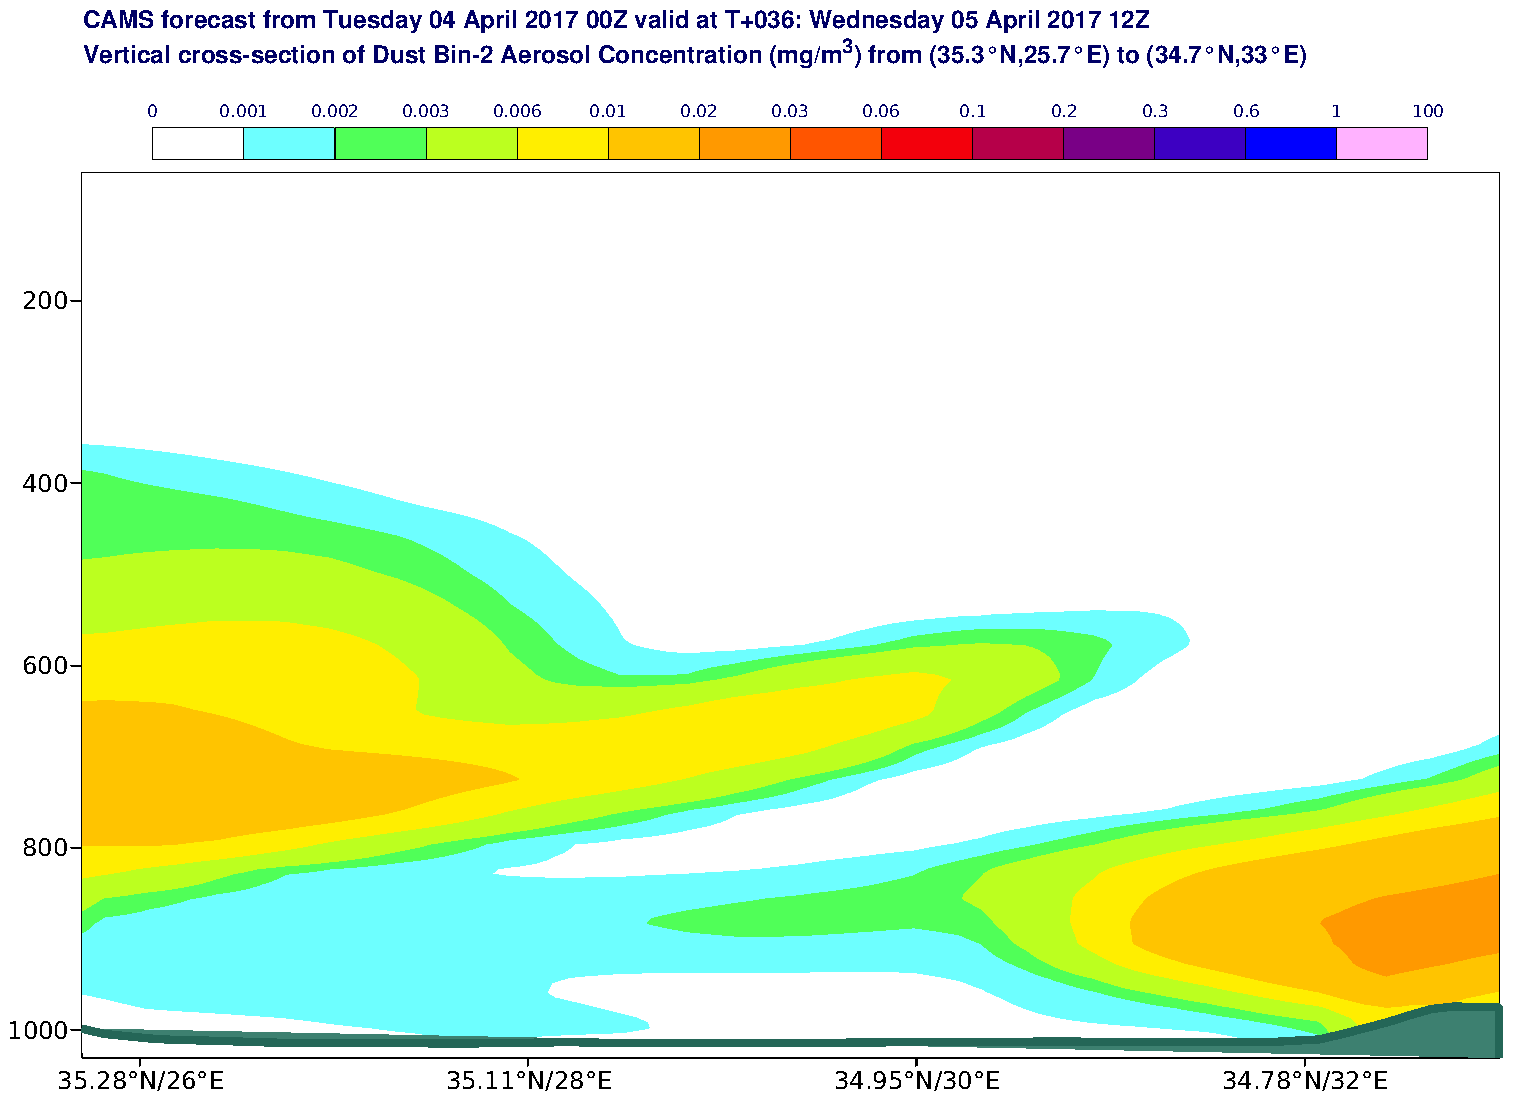 Vertical cross-section of Dust Bin-2 Aerosol Concentration (mg/m3) valid at T36 - 2017-04-05 12:00